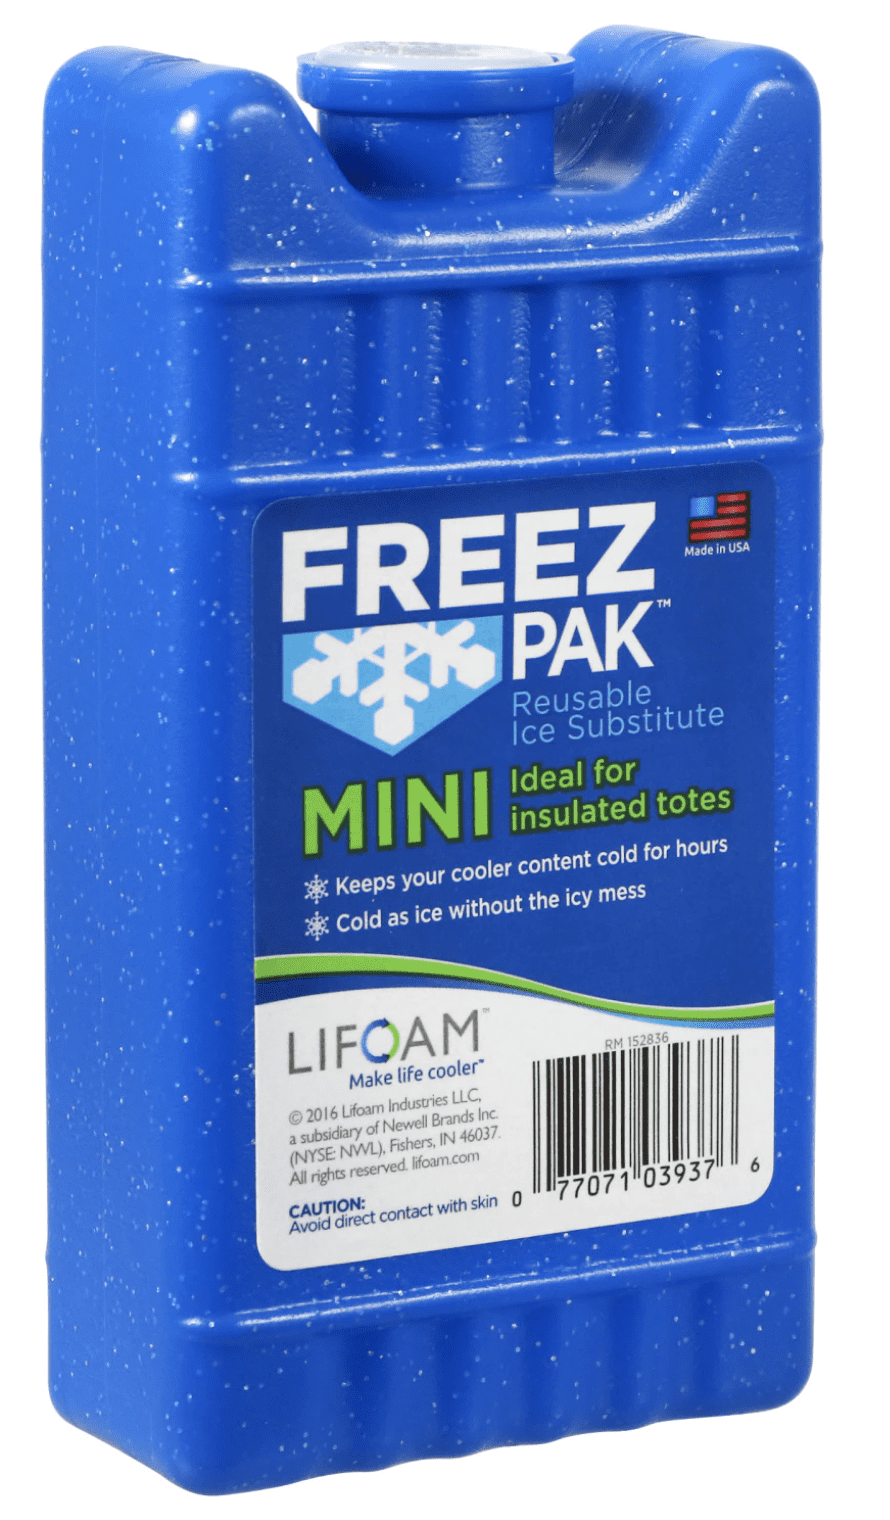 Ice Pack - Ice packs for coolers - Includes: 3 Ice Pack size Mini